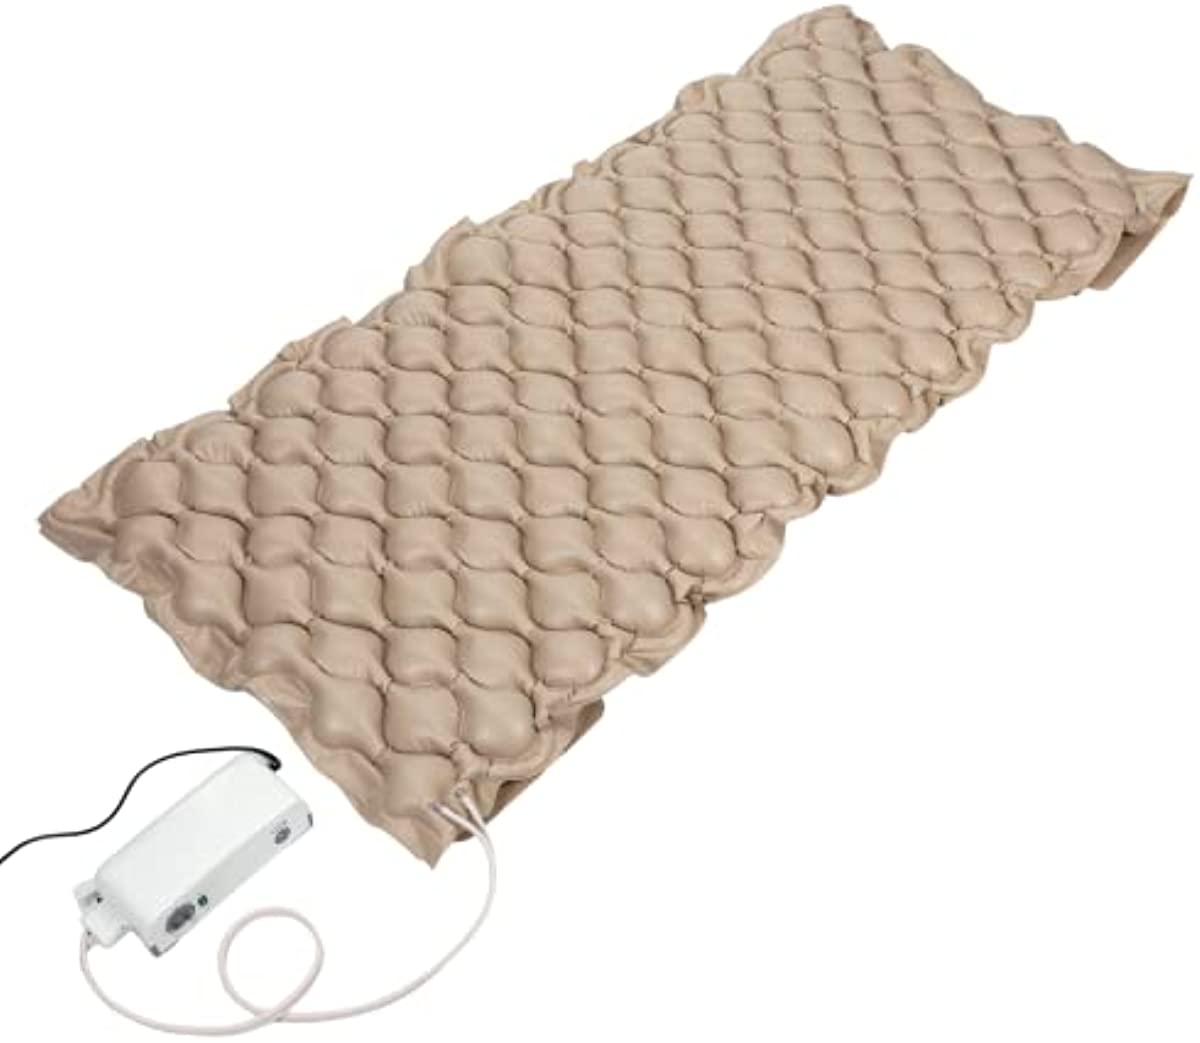 Wave Medical Premium Alternating Pressure Pad System - Mattress Pad with Ultra Quiet Pump System - Pressure Sore Relief, Ulcer Bed Sore Prevention, Fits Standard Hospital Bed for Bedridden Patients